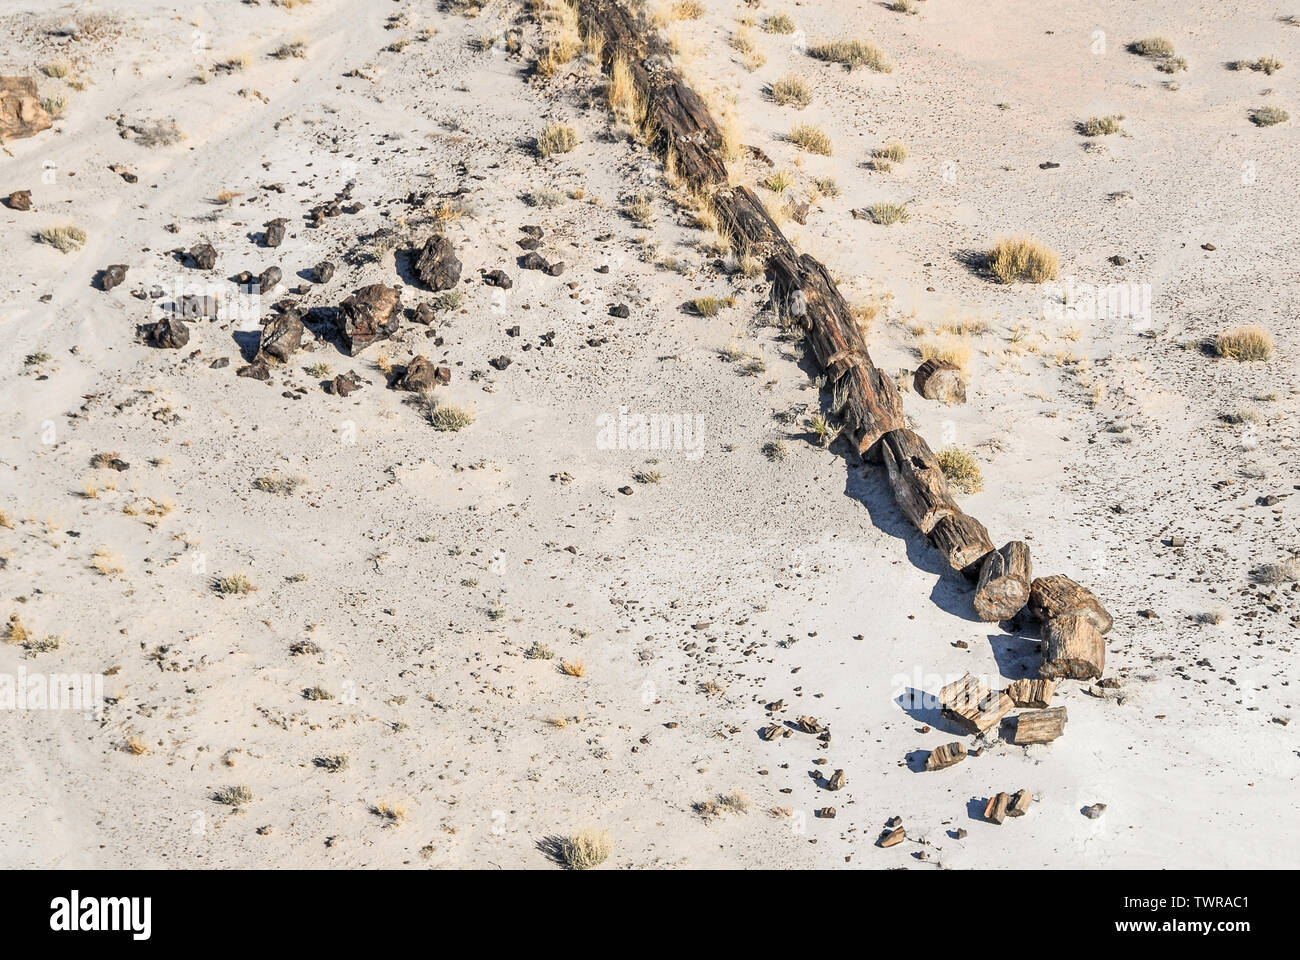 Helicopter view of a large petrified tree trunk in situ on the desert floor near Painted Desert National Park in Arizona. Stock Photo